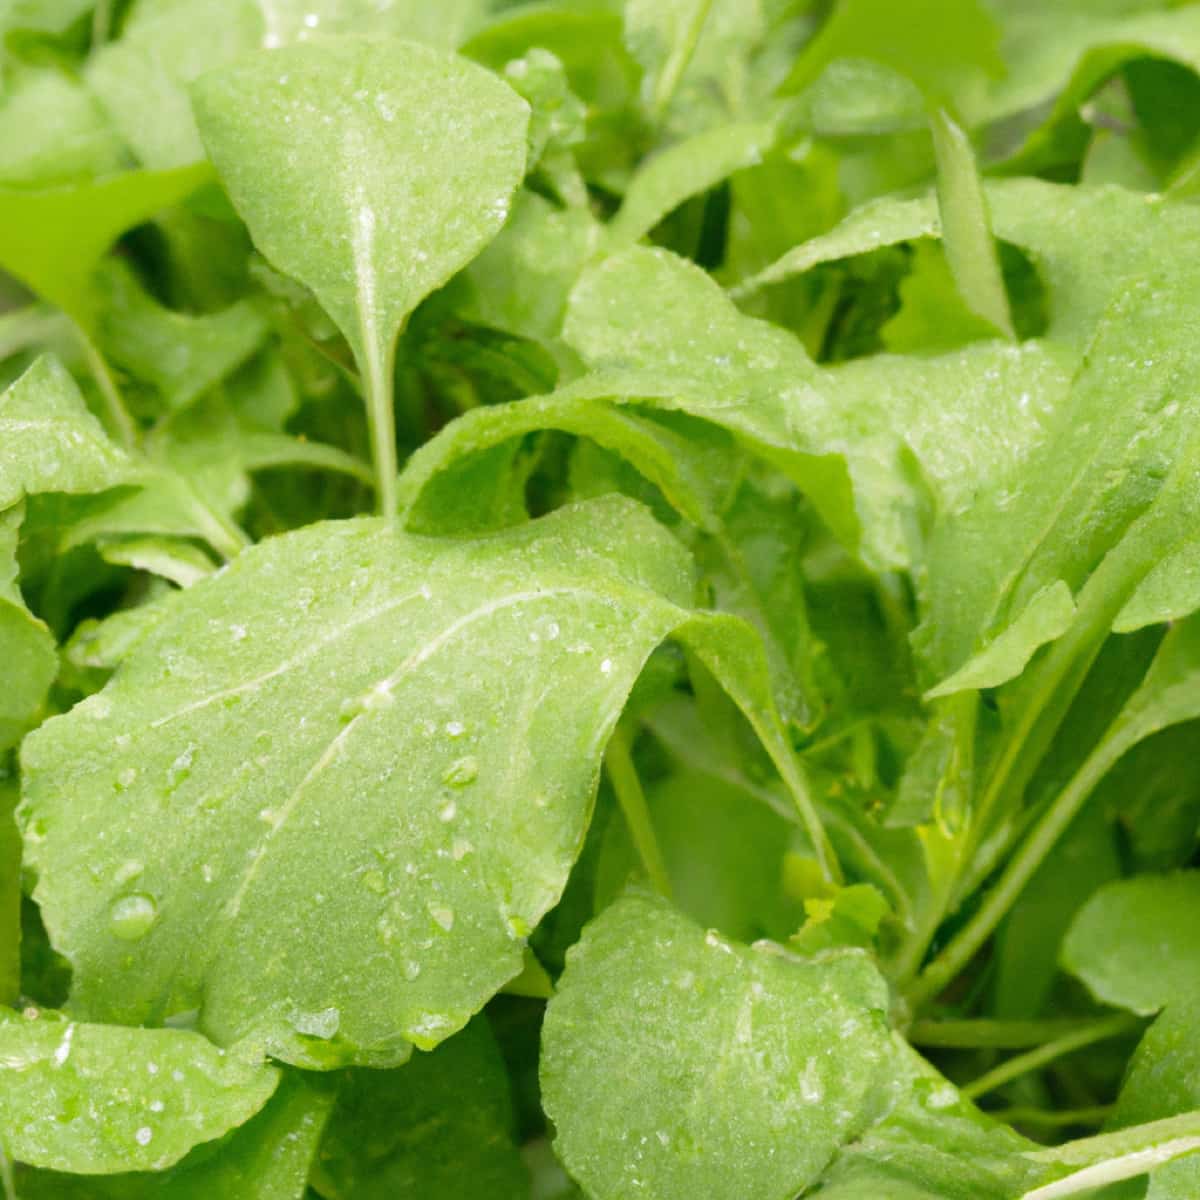 Common Problems With Mustard Greens3